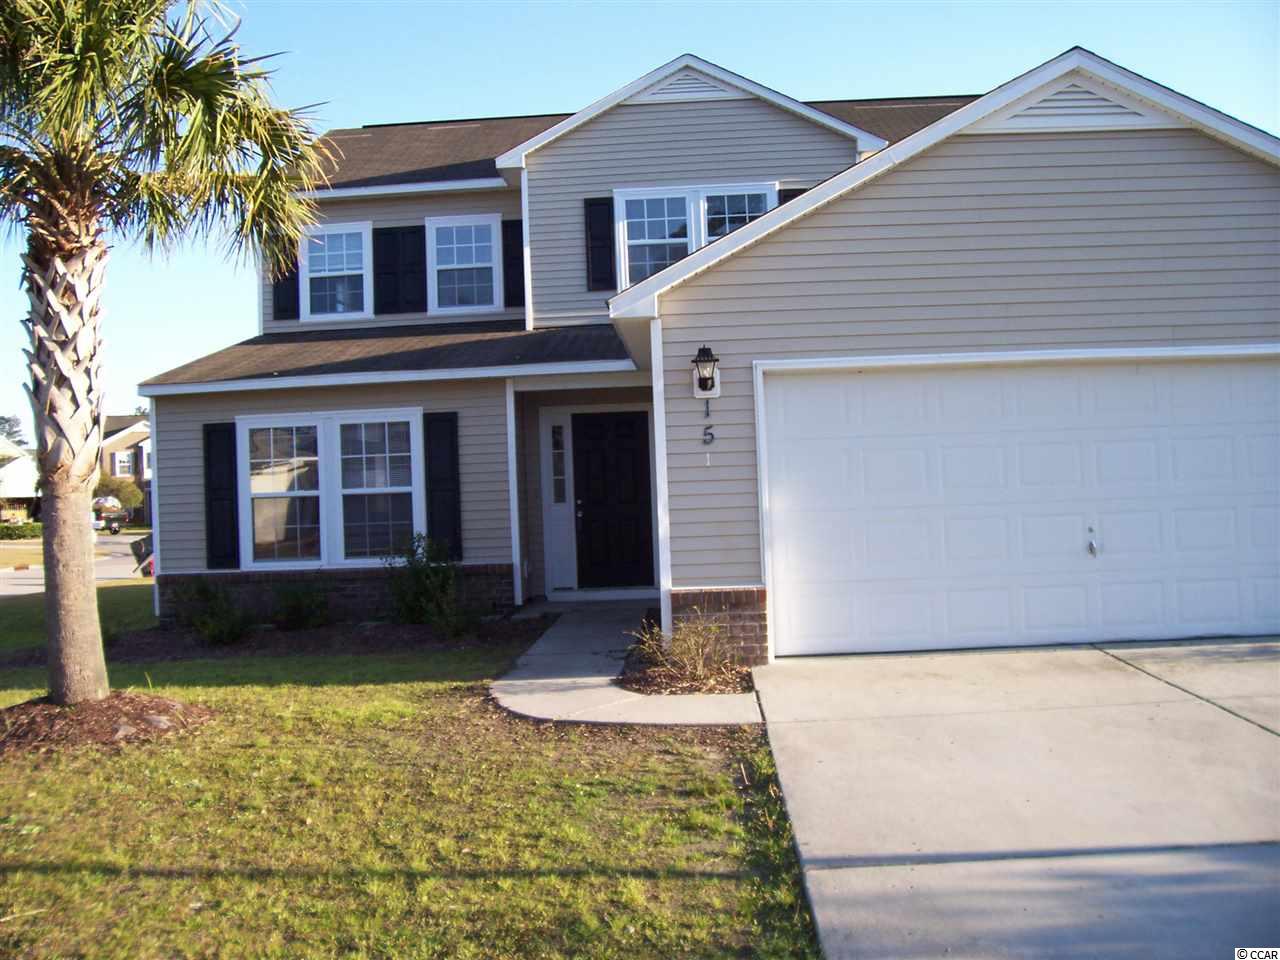 151 Weeping Willow Dr. Myrtle Beach, SC 29579